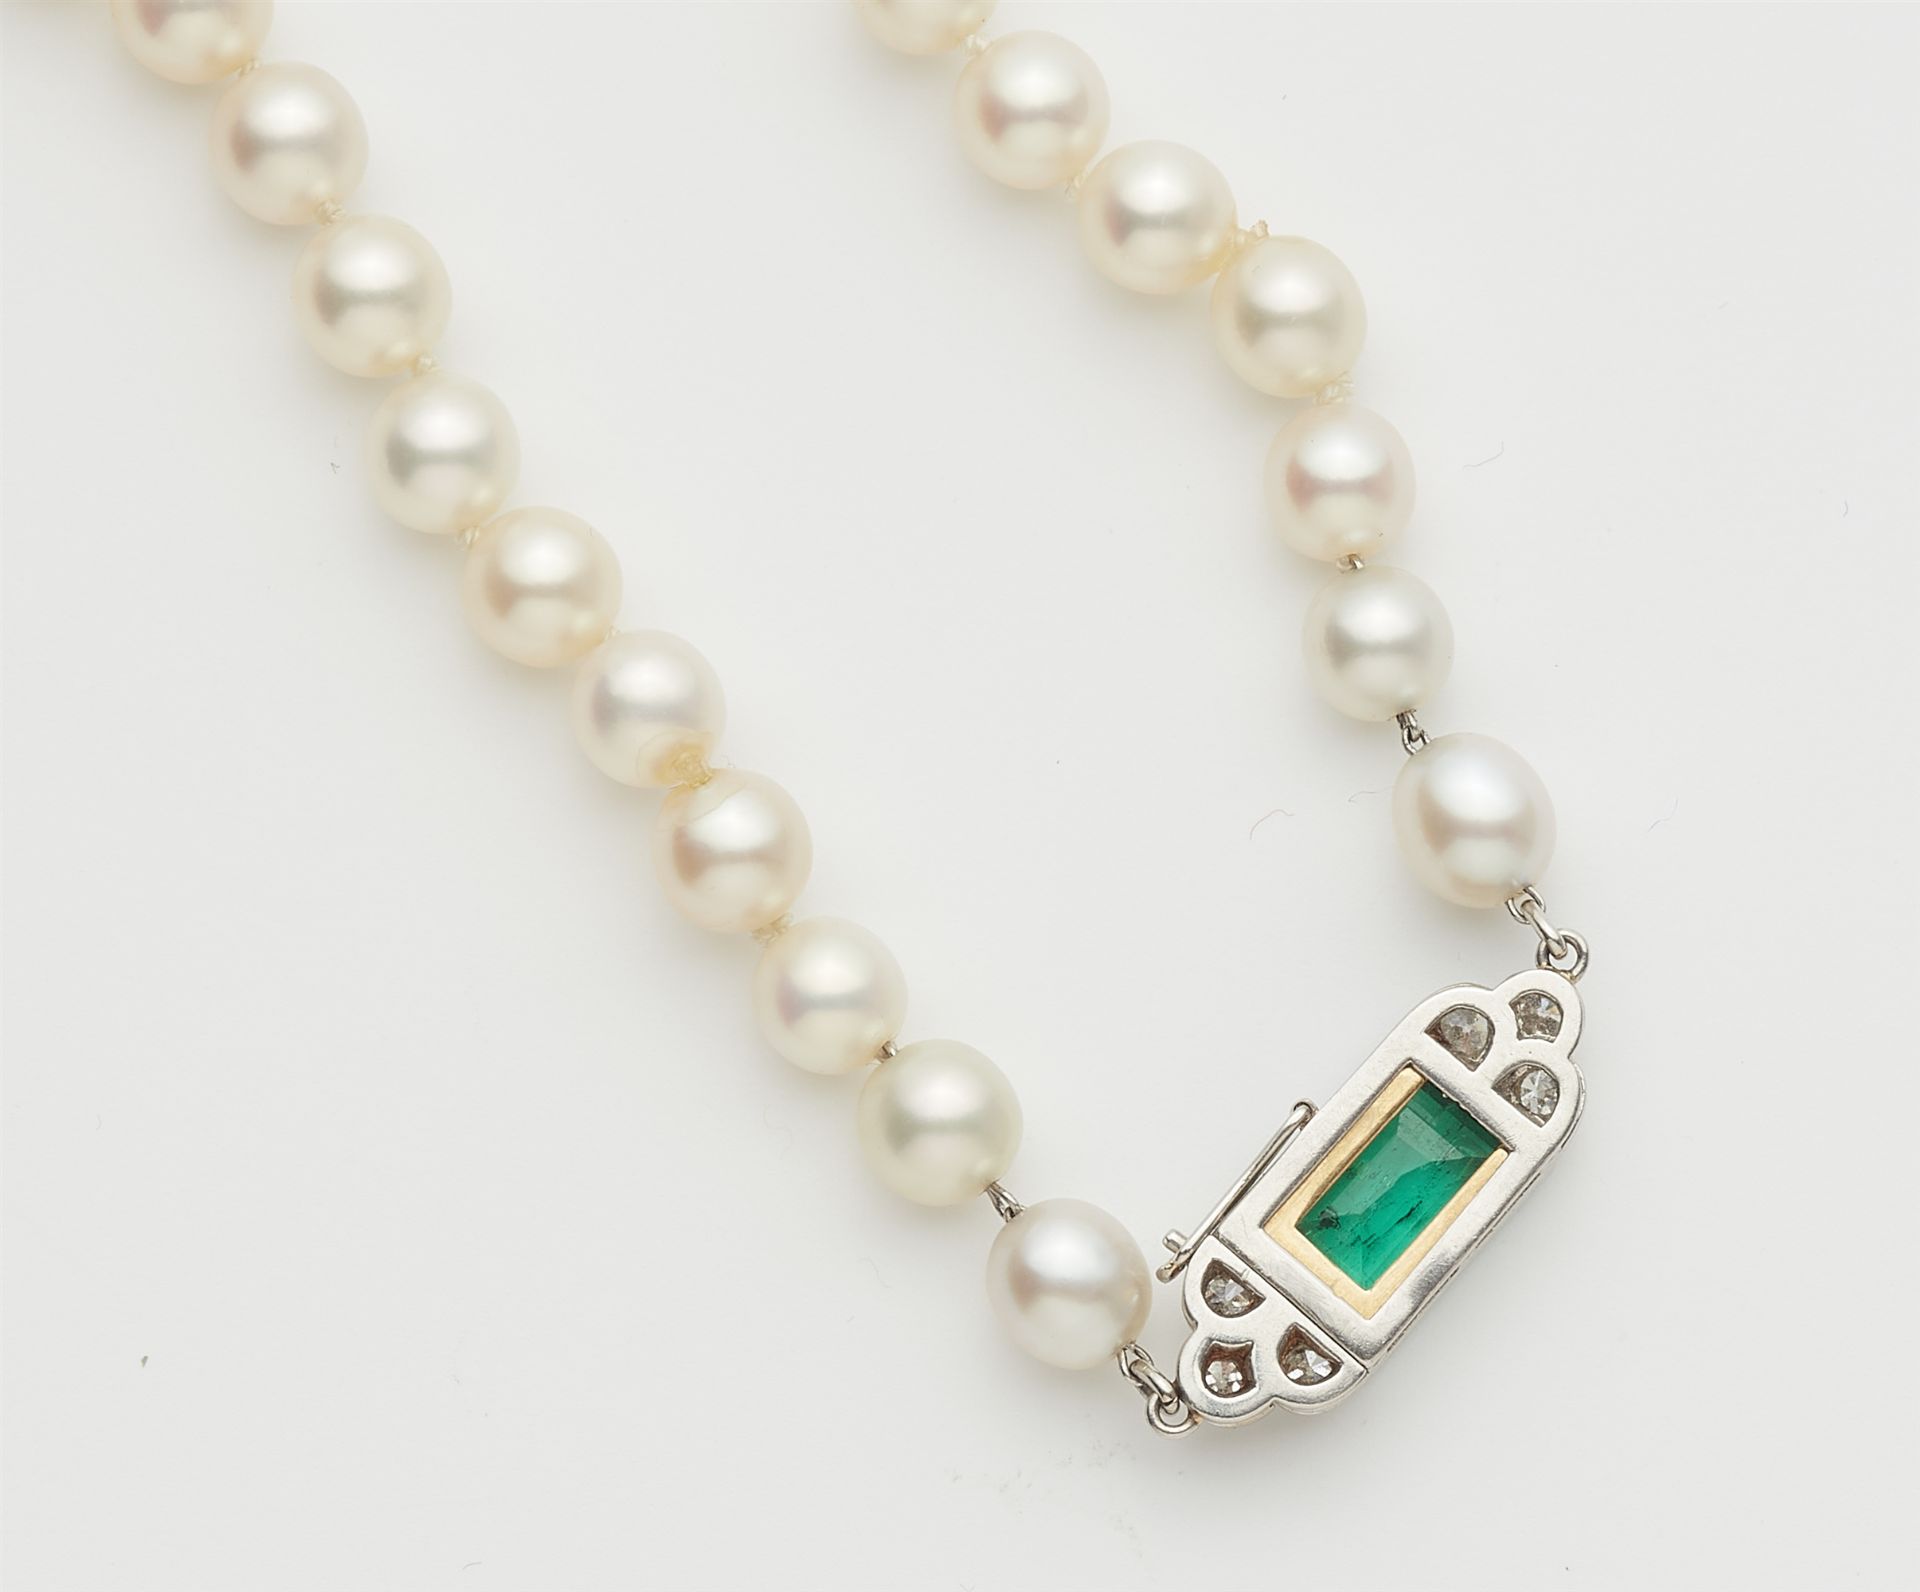 An Art Deco cultured pearl necklace with an 18k gold emerald and diamond clasp. - Image 2 of 2